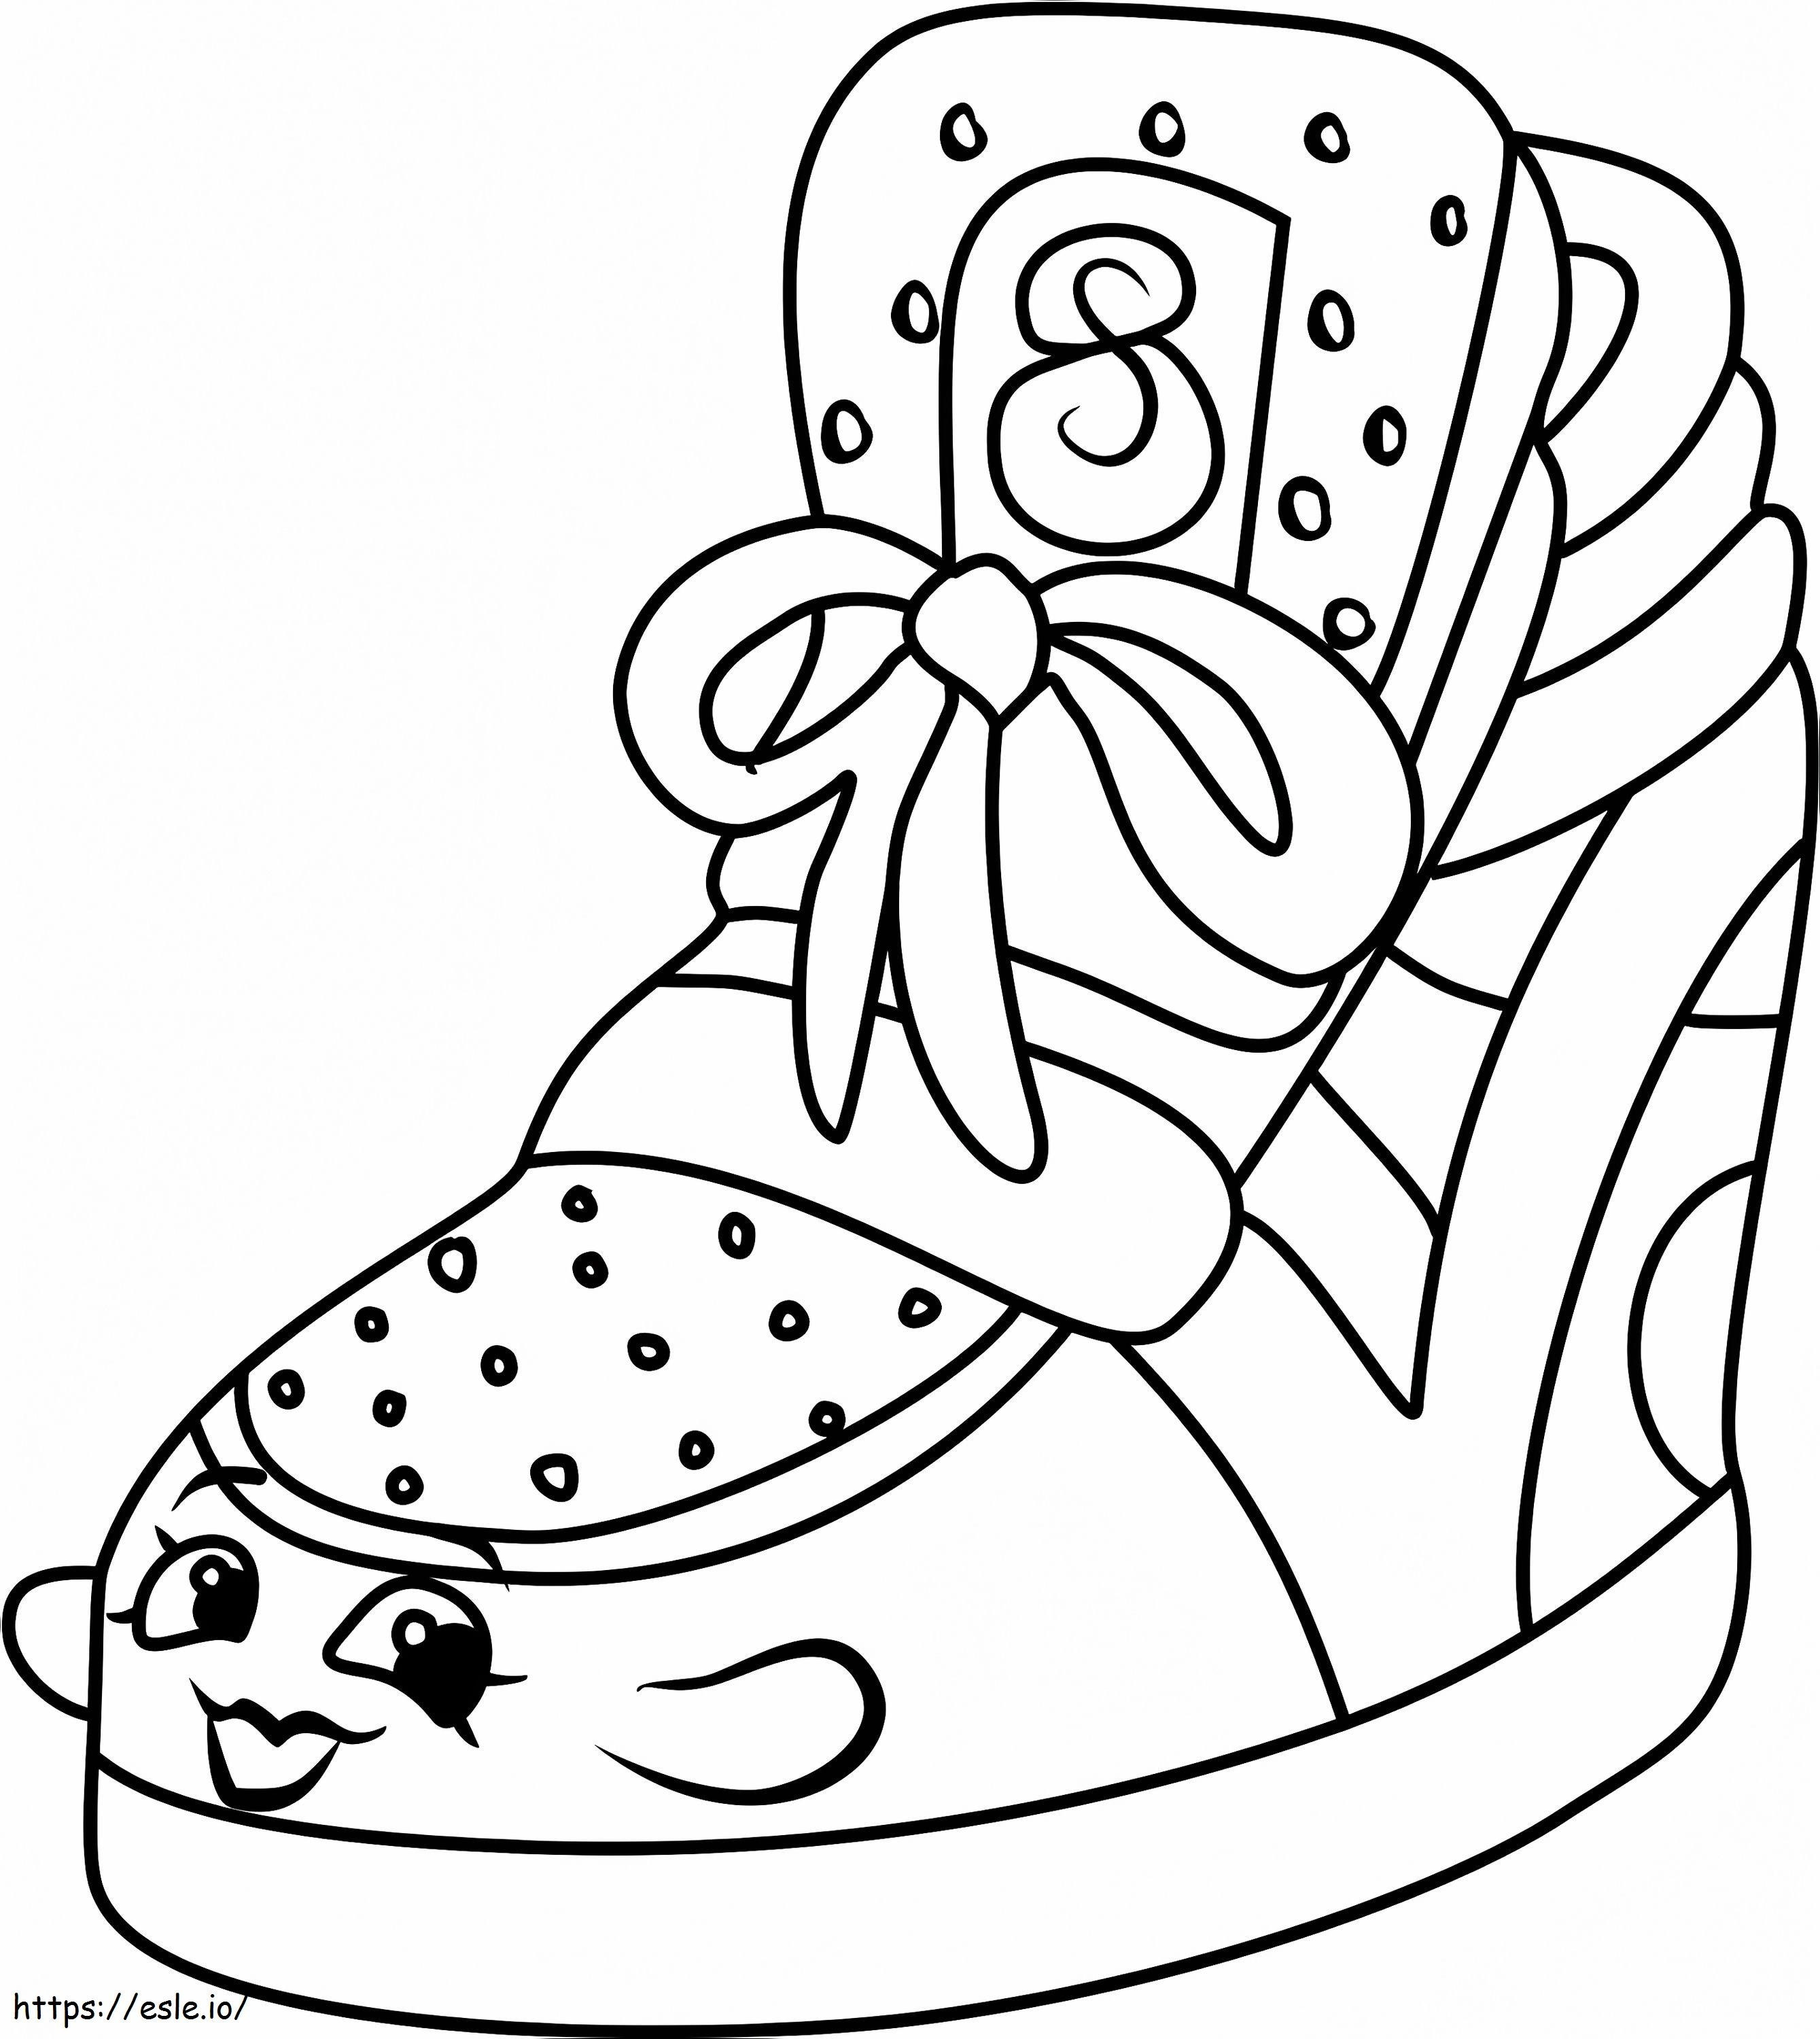 Sneaky Wedge Shopkins A4 coloring page